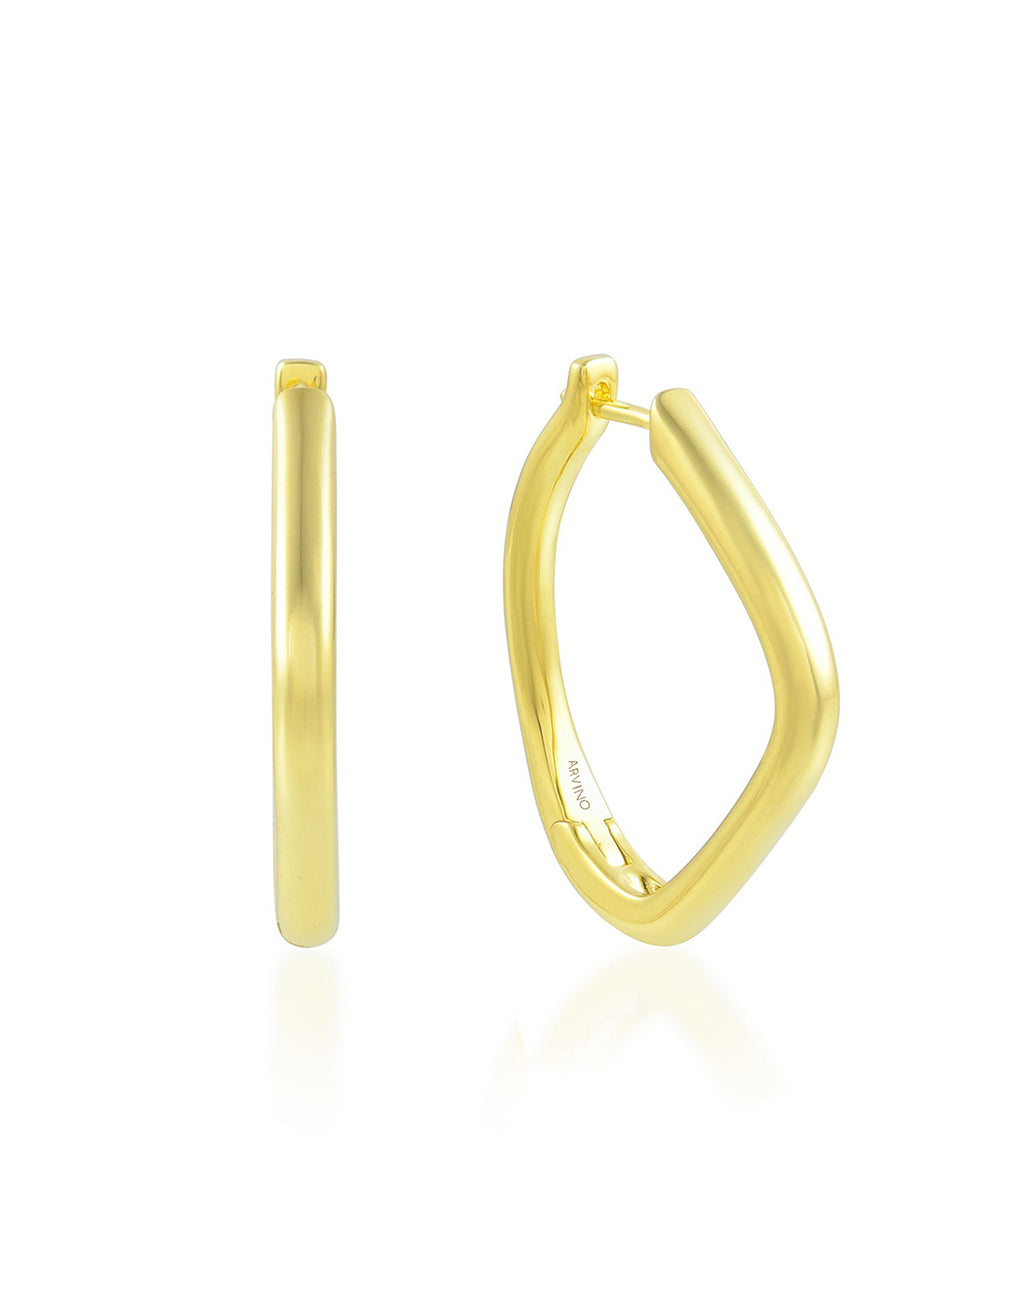 Twisted Oval Hoops - Statement Earrings - Gold-Plated & Hypoallergenic Jewellery - Made in India - Dubai Jewellery - Dori